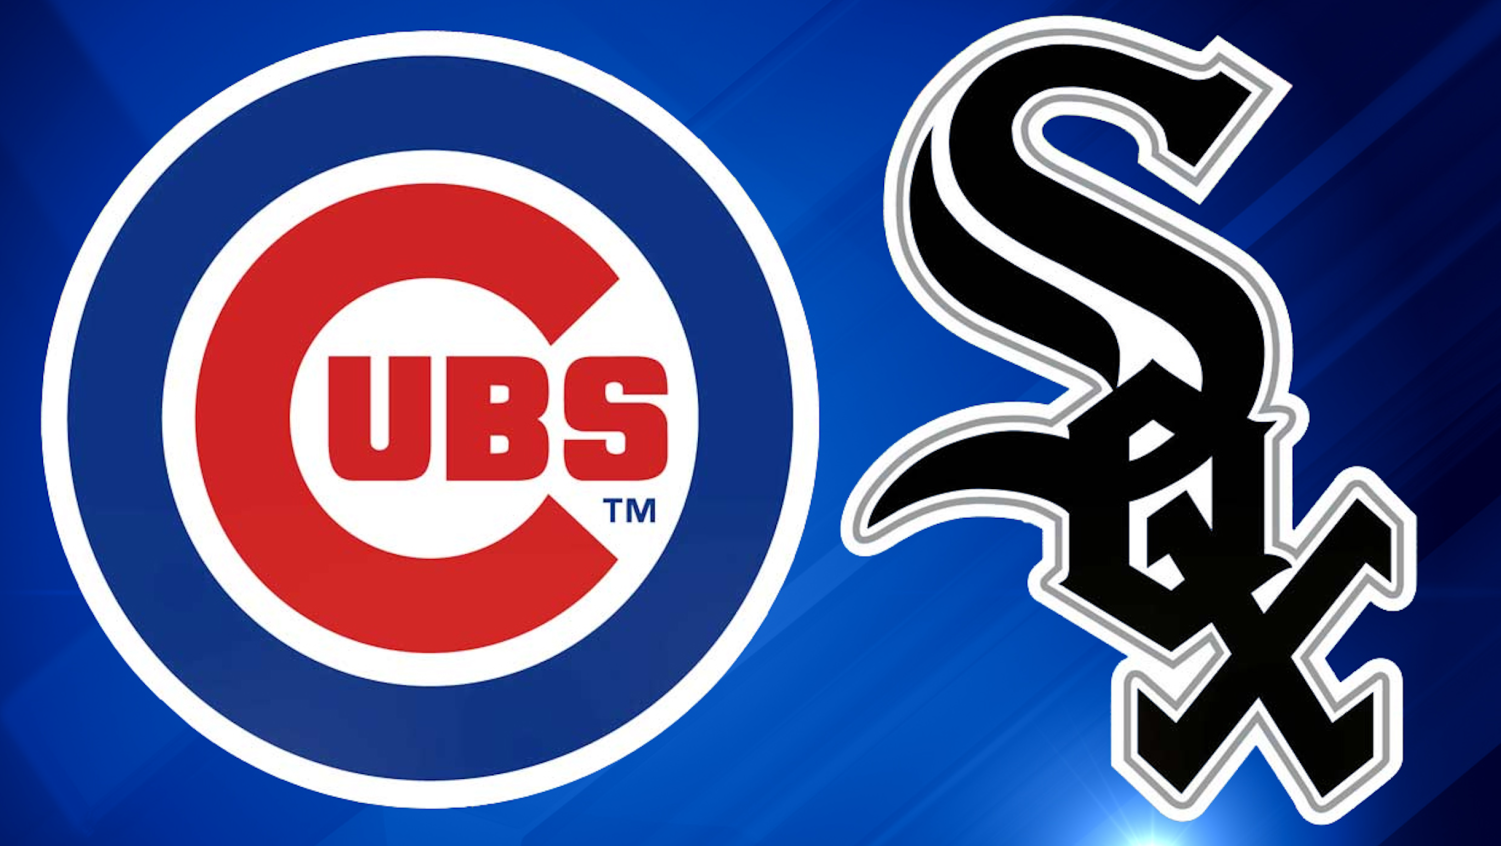 The White Sox versus the Cubs a crosstown rivalry comparison FHC